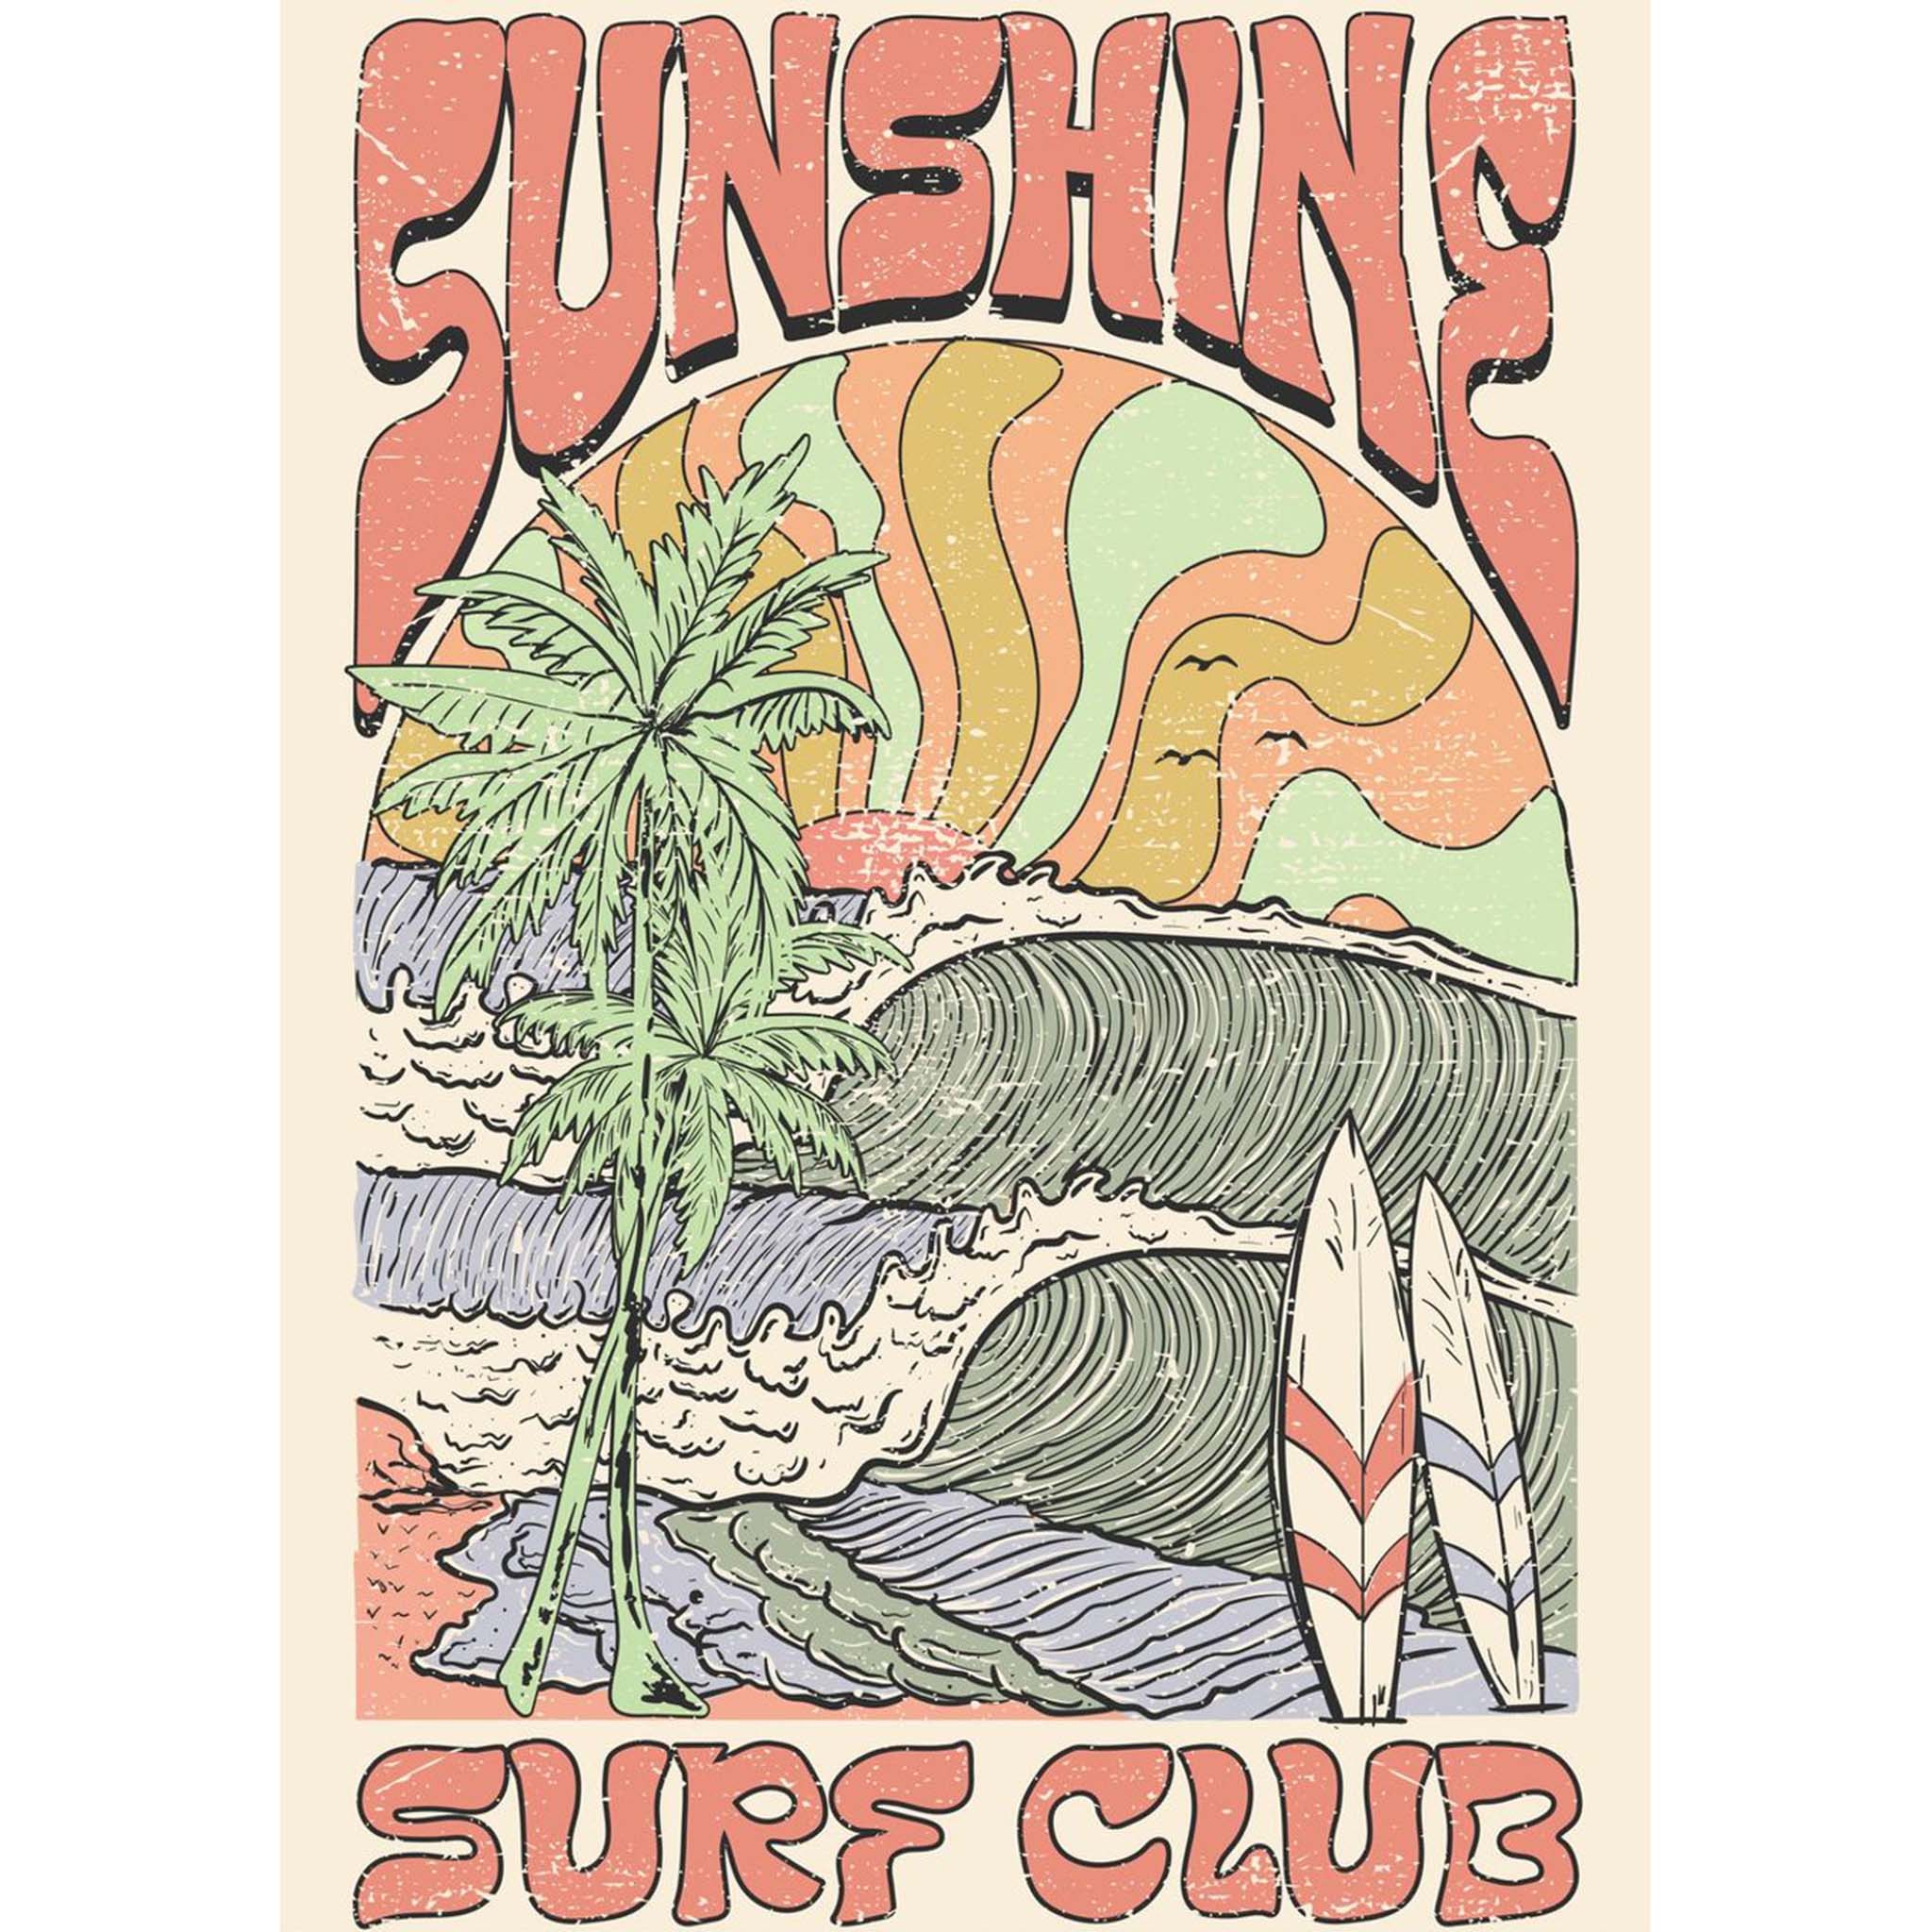 A4 rice paper design that features retro sunny vibes with a scene of waves, surfboards, and palm trees surrounded by the words 'sunshine surf club'. White borders are on the sides.